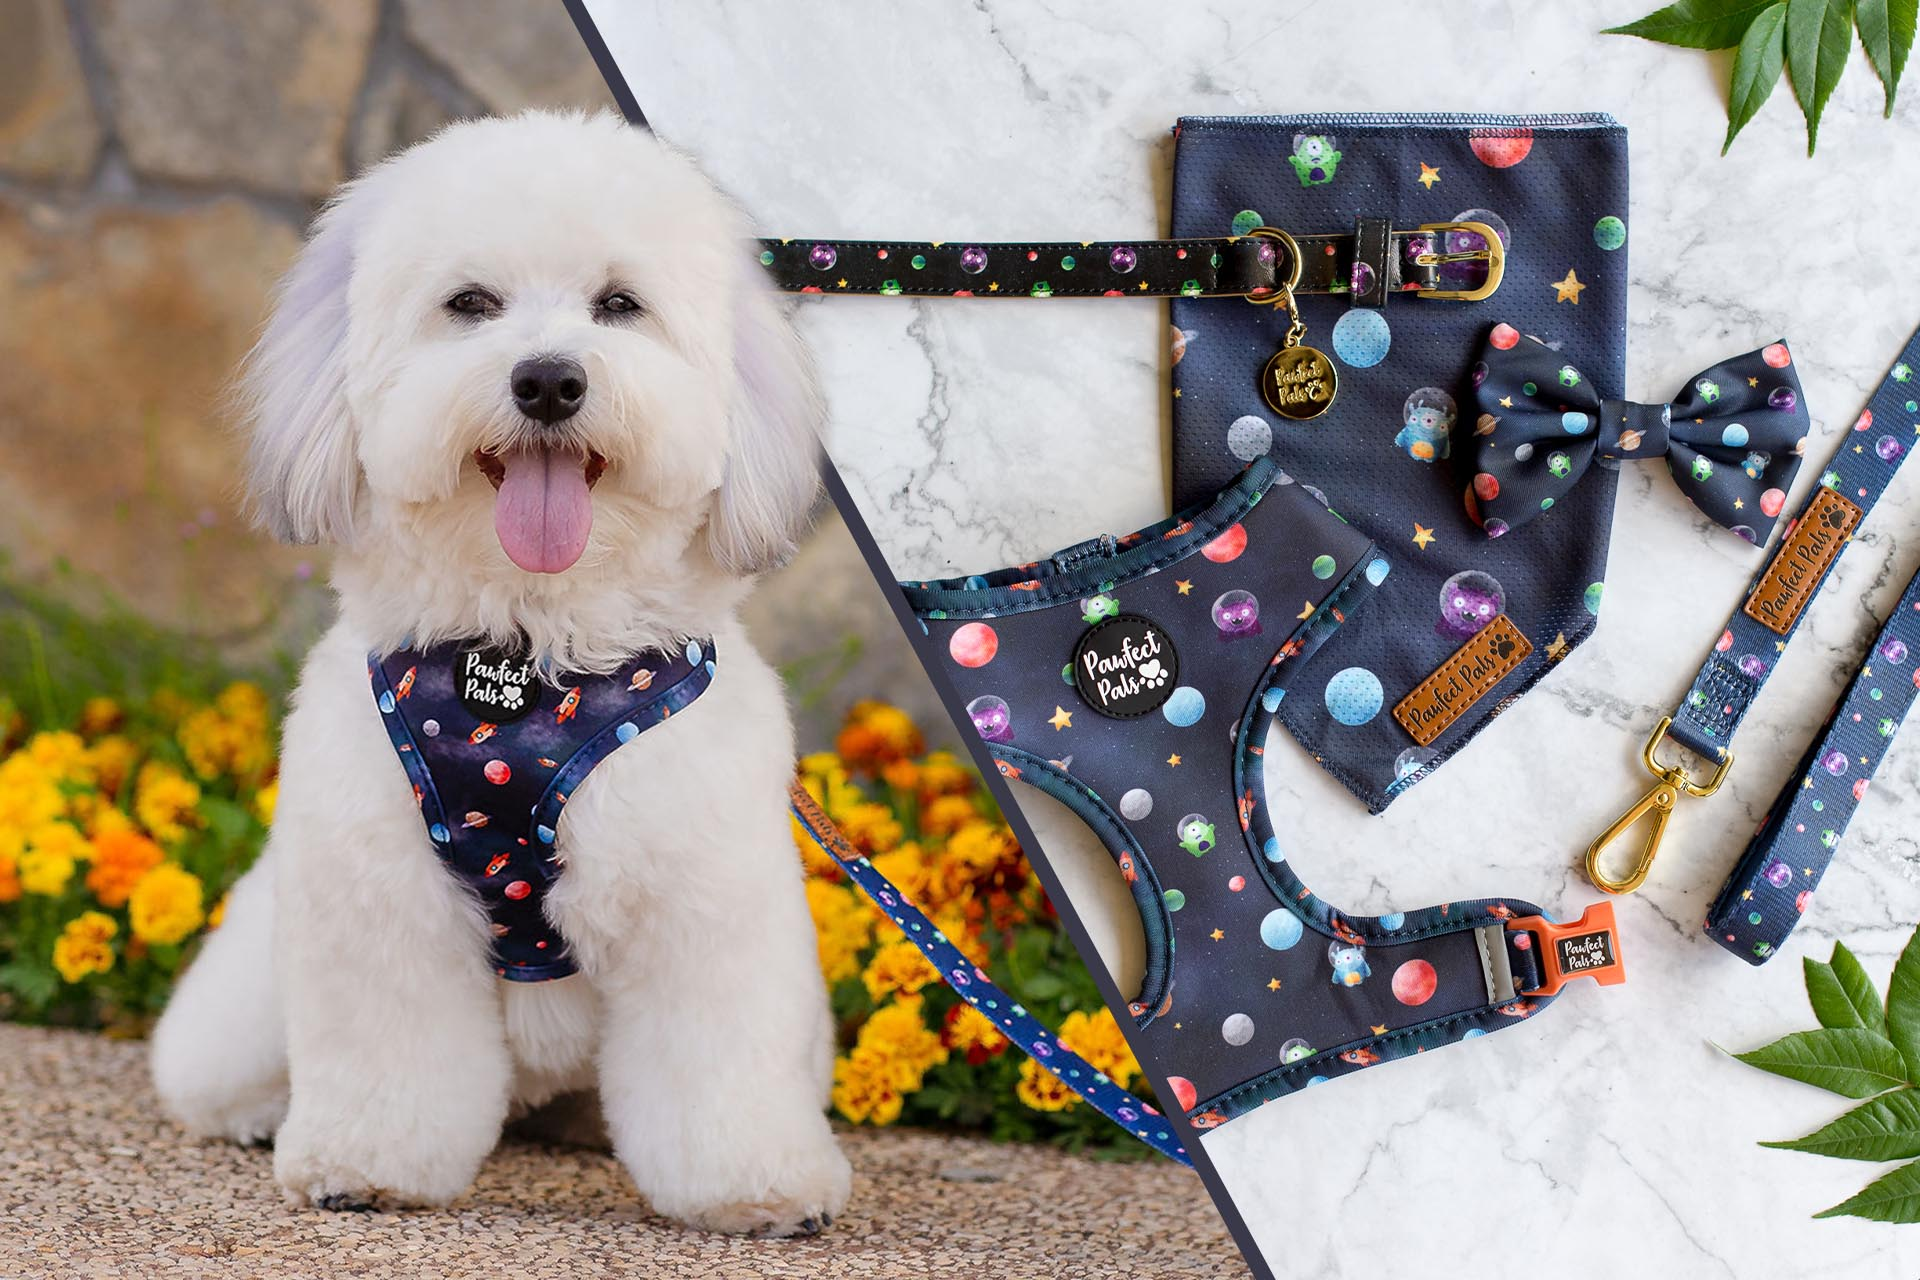 Infinity & Beyond dog accessories collection.